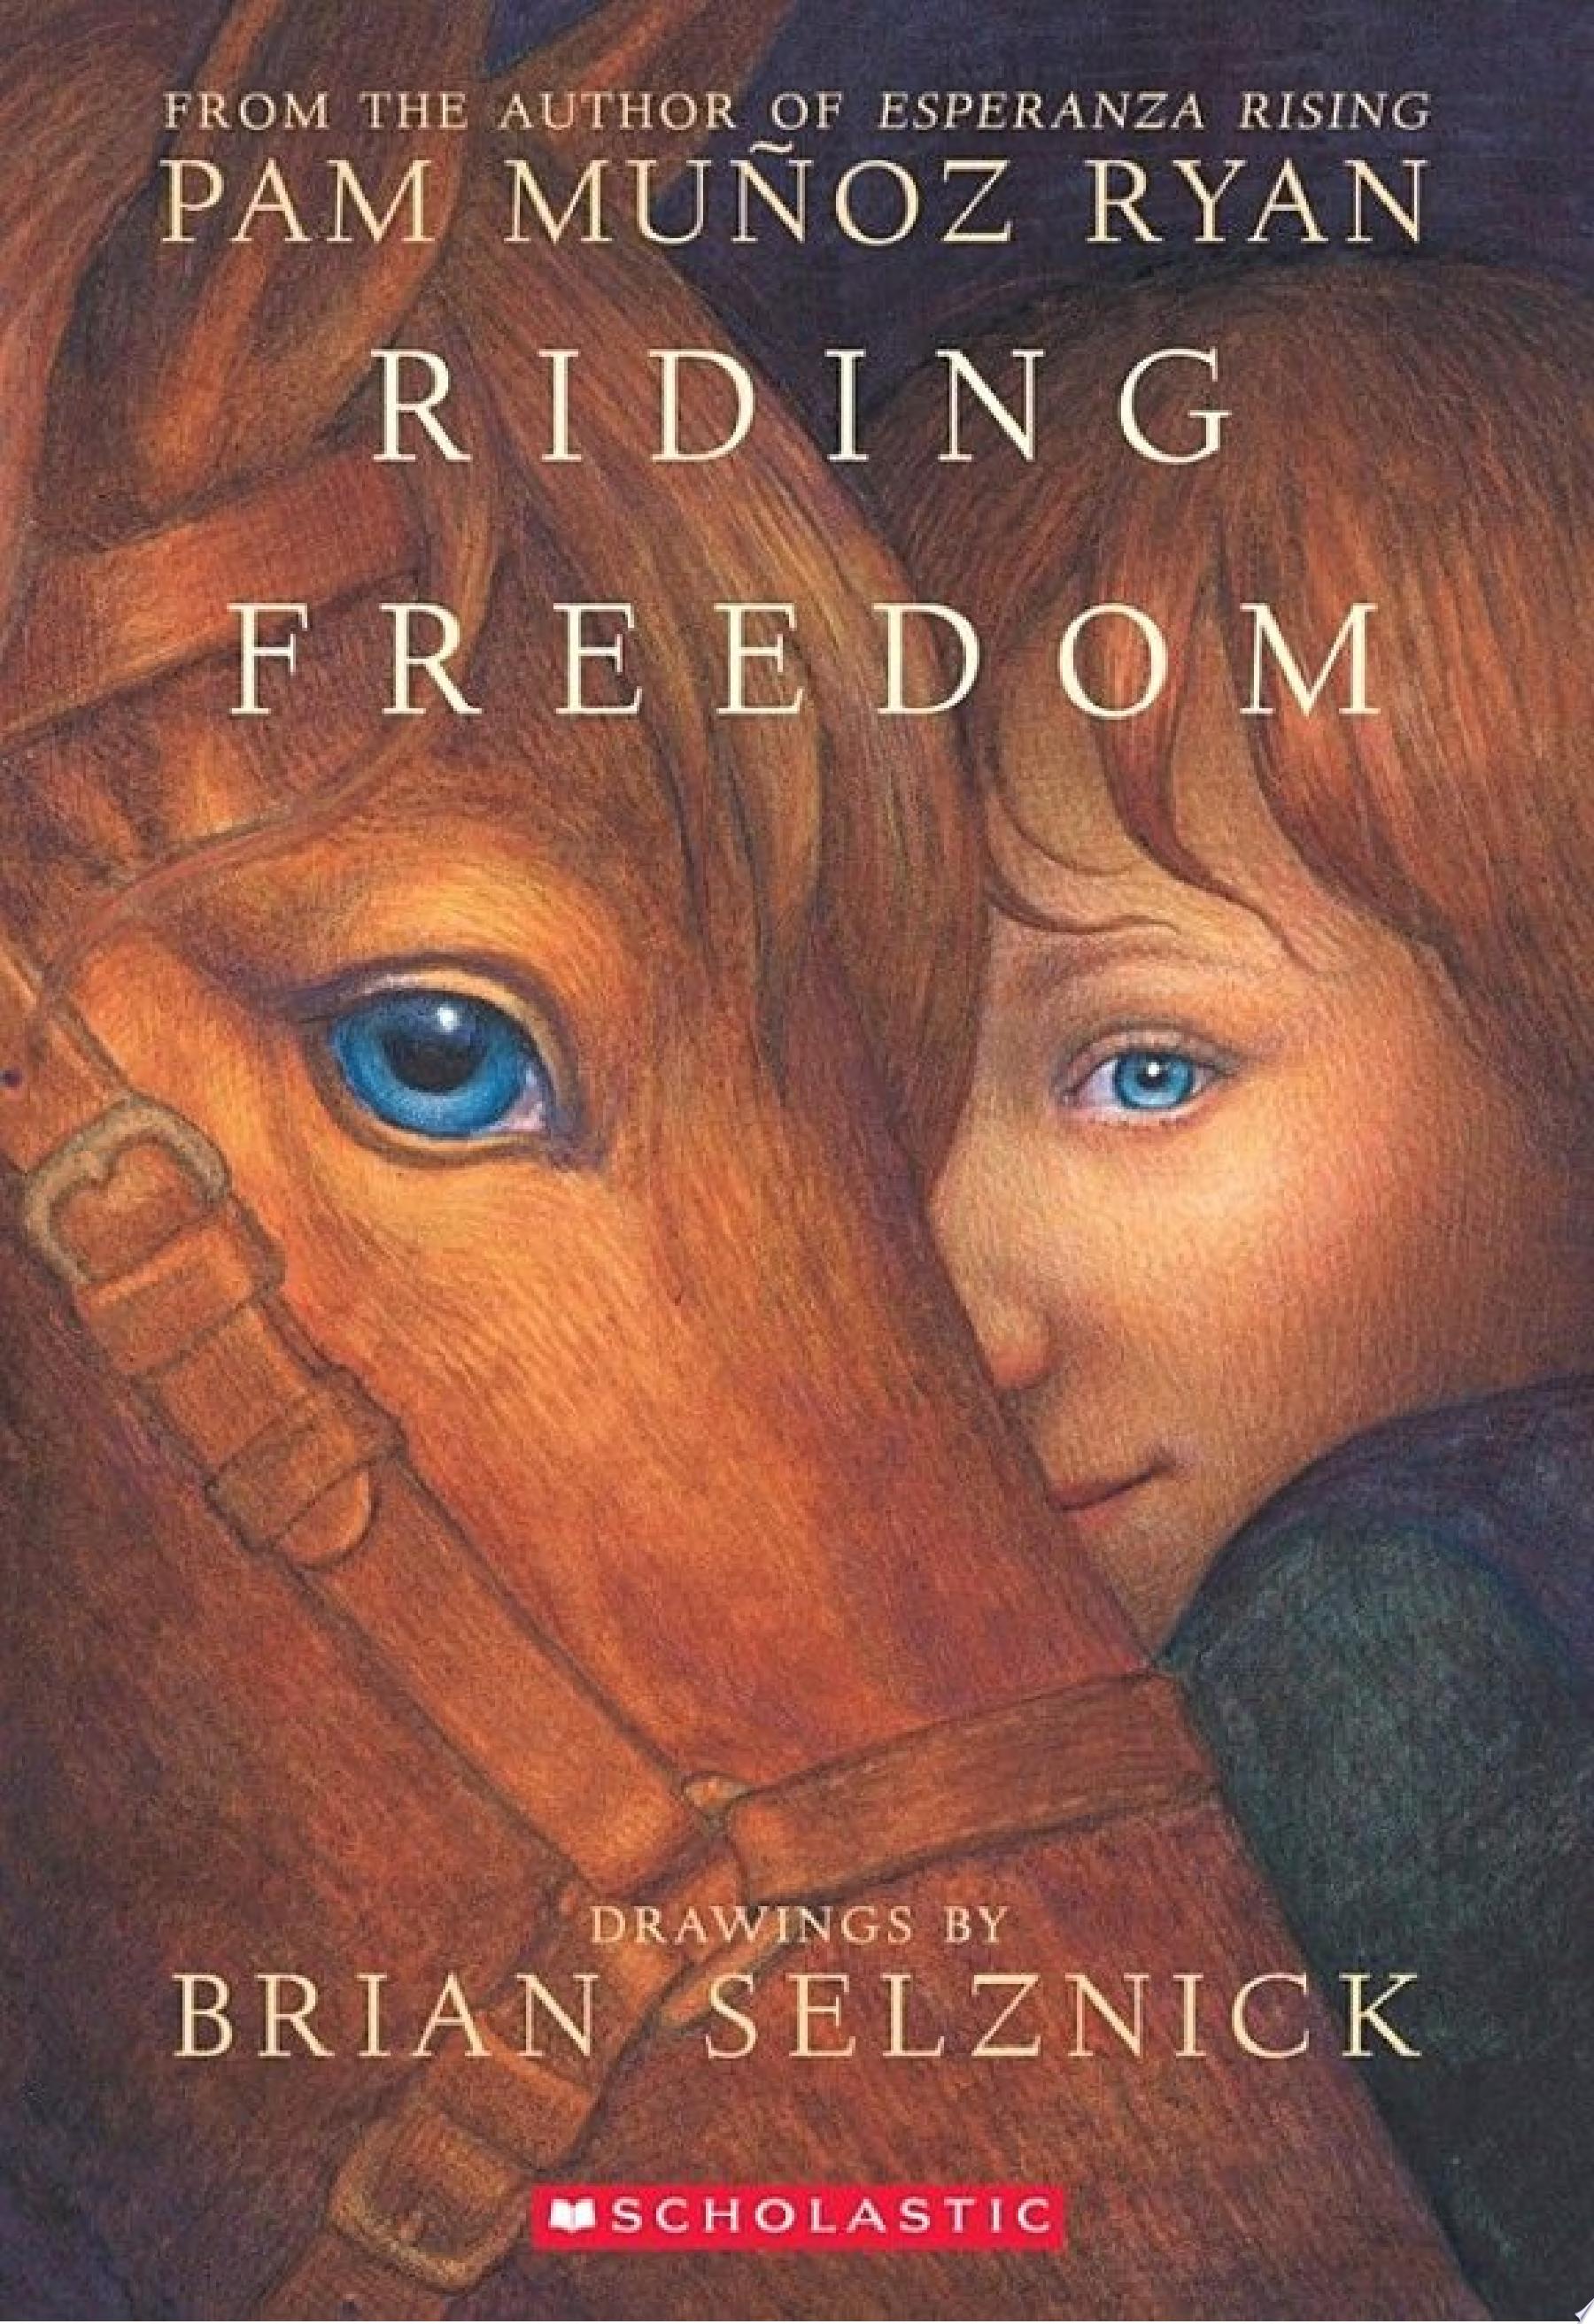 Image for "Riding Freedom"